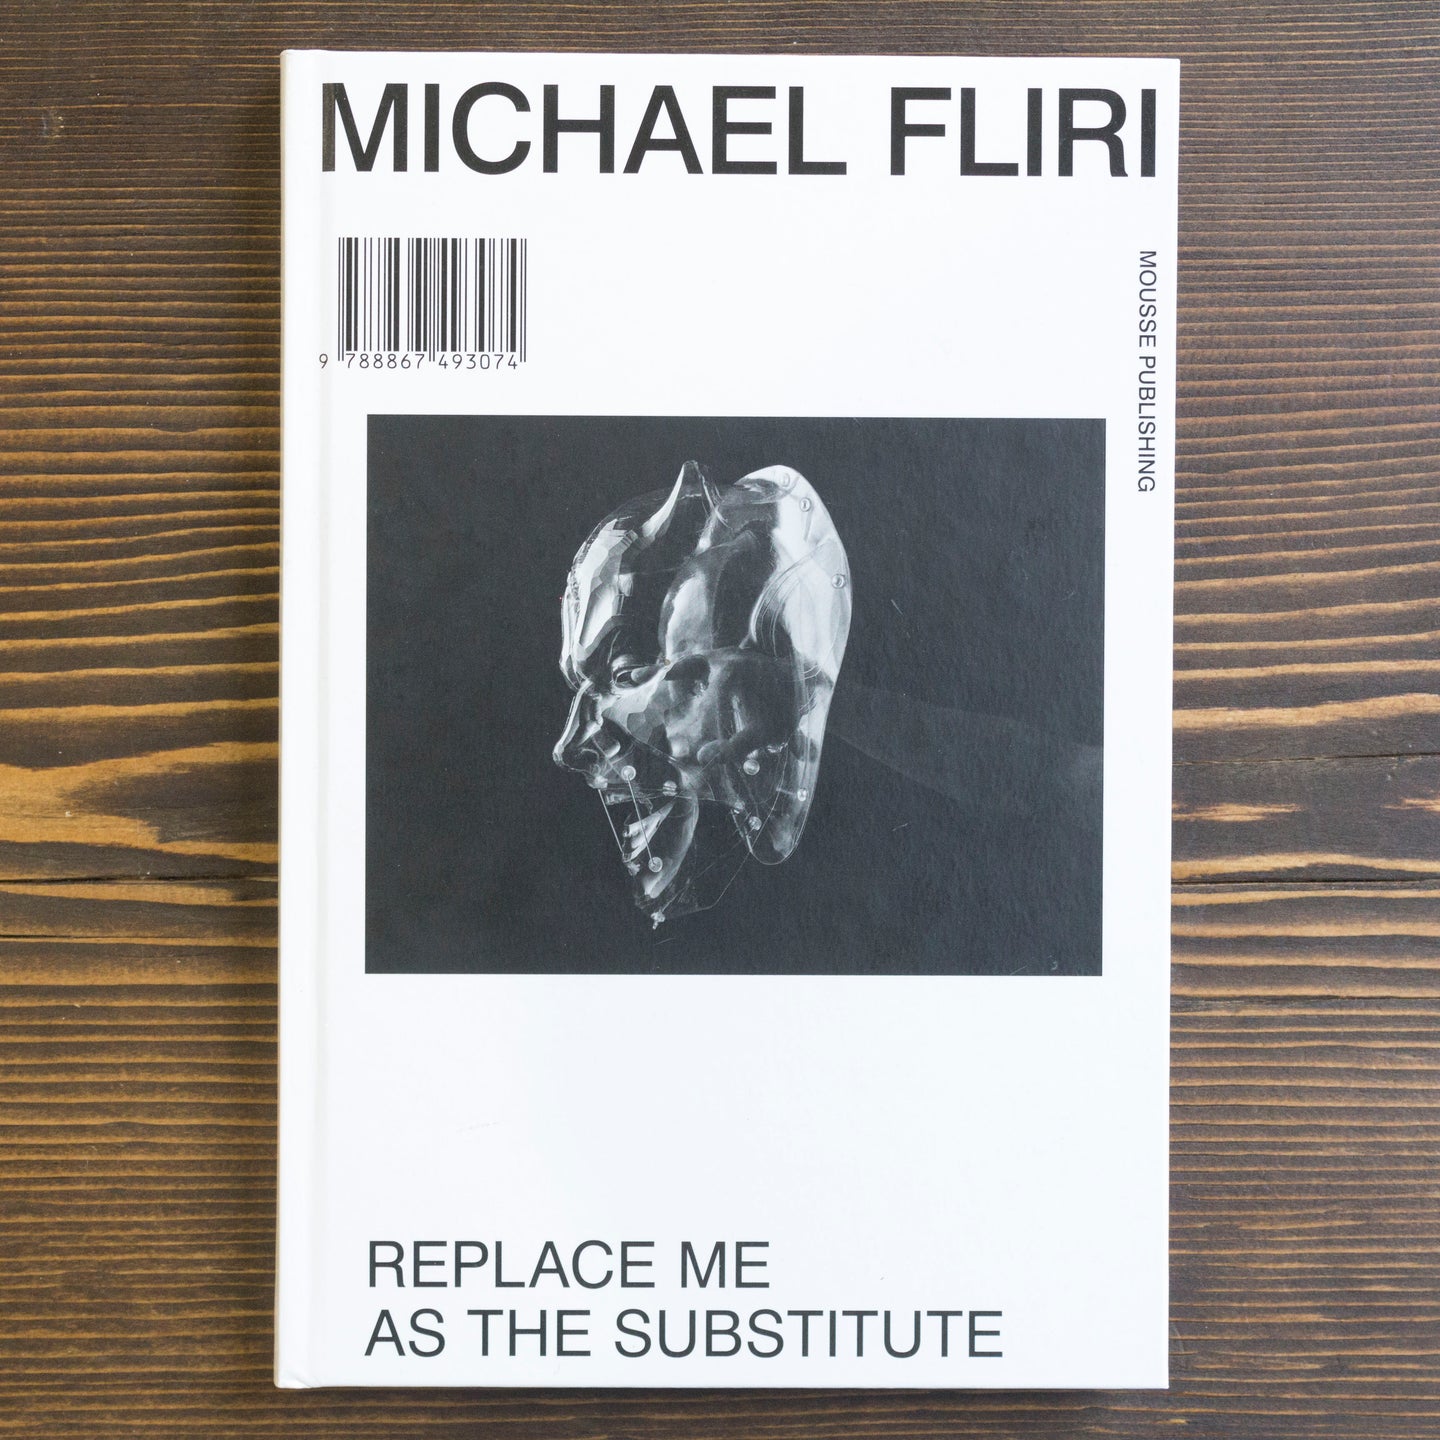 MICHAEL FLIRI: REPLACE ME AS THE SUBSTITUTE